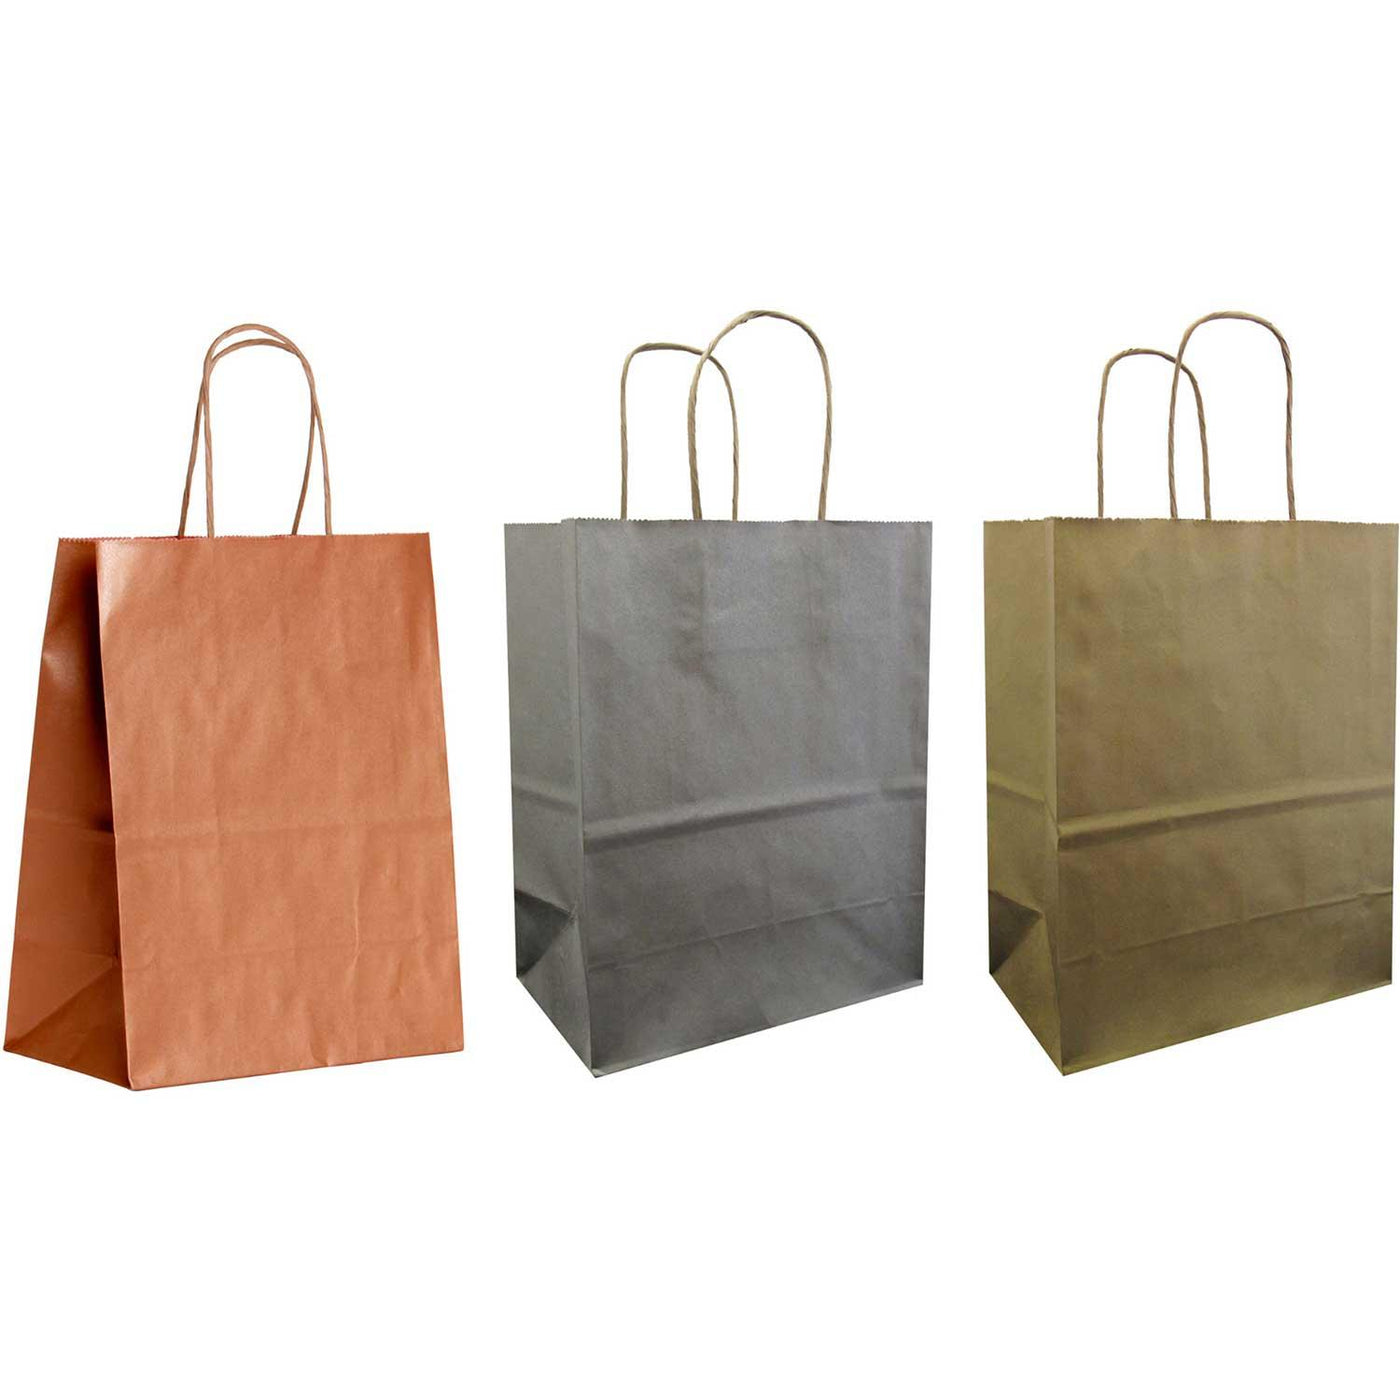 All Occasion Metallic Kraft Medium Solid Totes (12 Pack) by Present Paper - Vysn